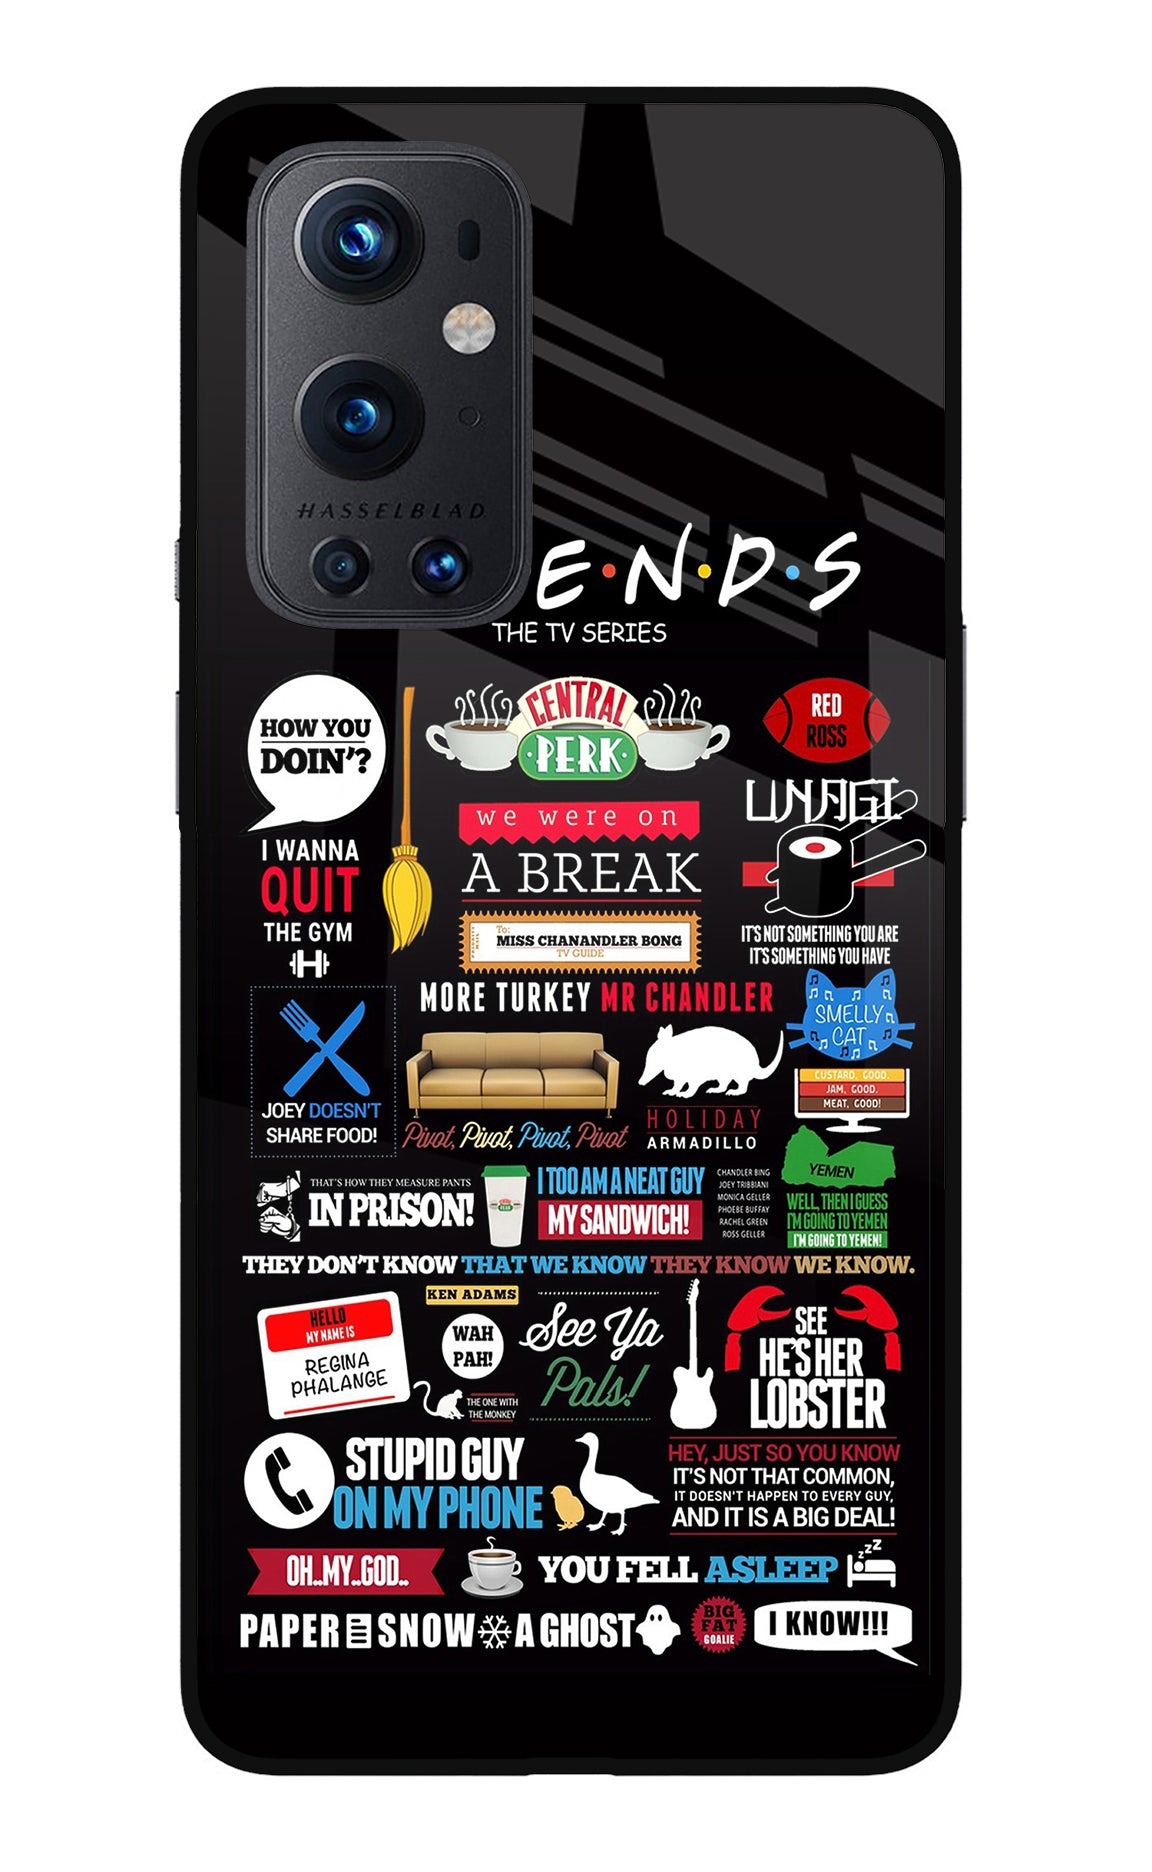 FRIENDS Oneplus 9 Pro Back Cover